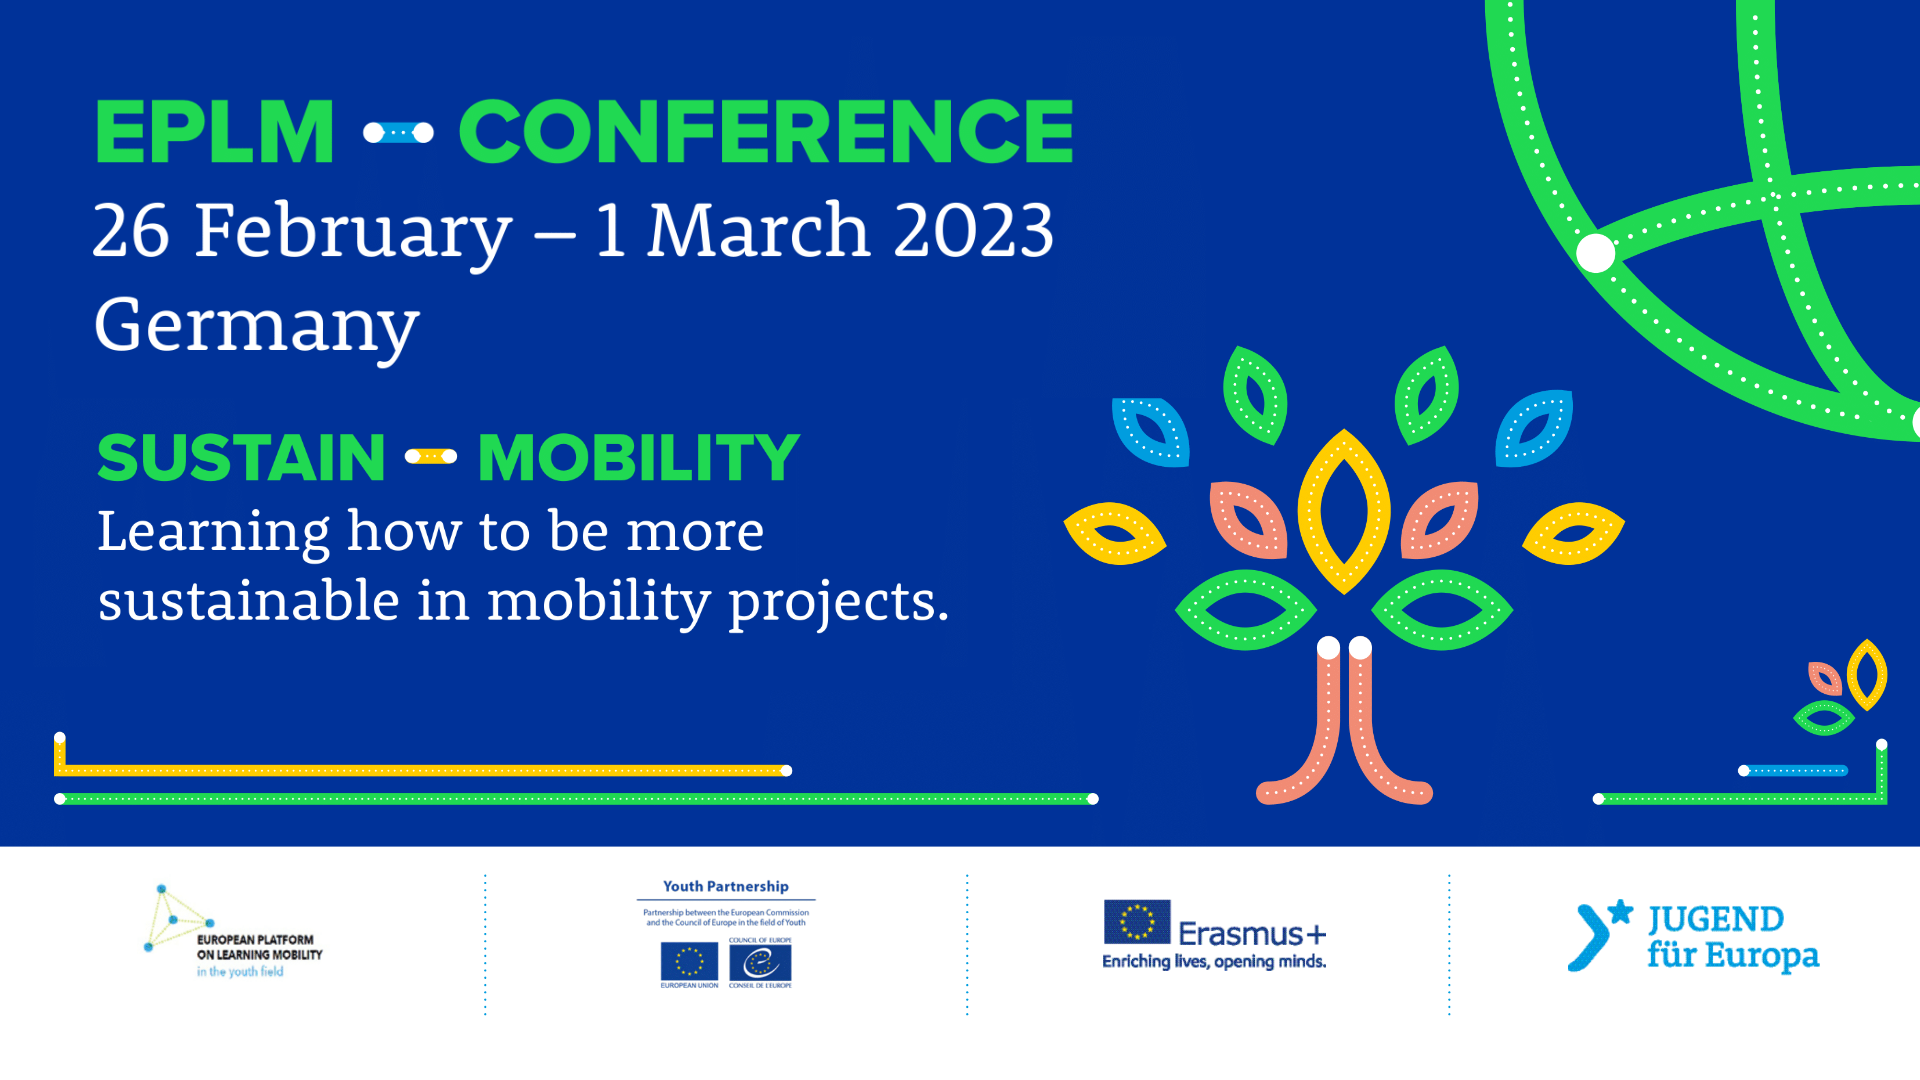 Sustainable Mobility projects